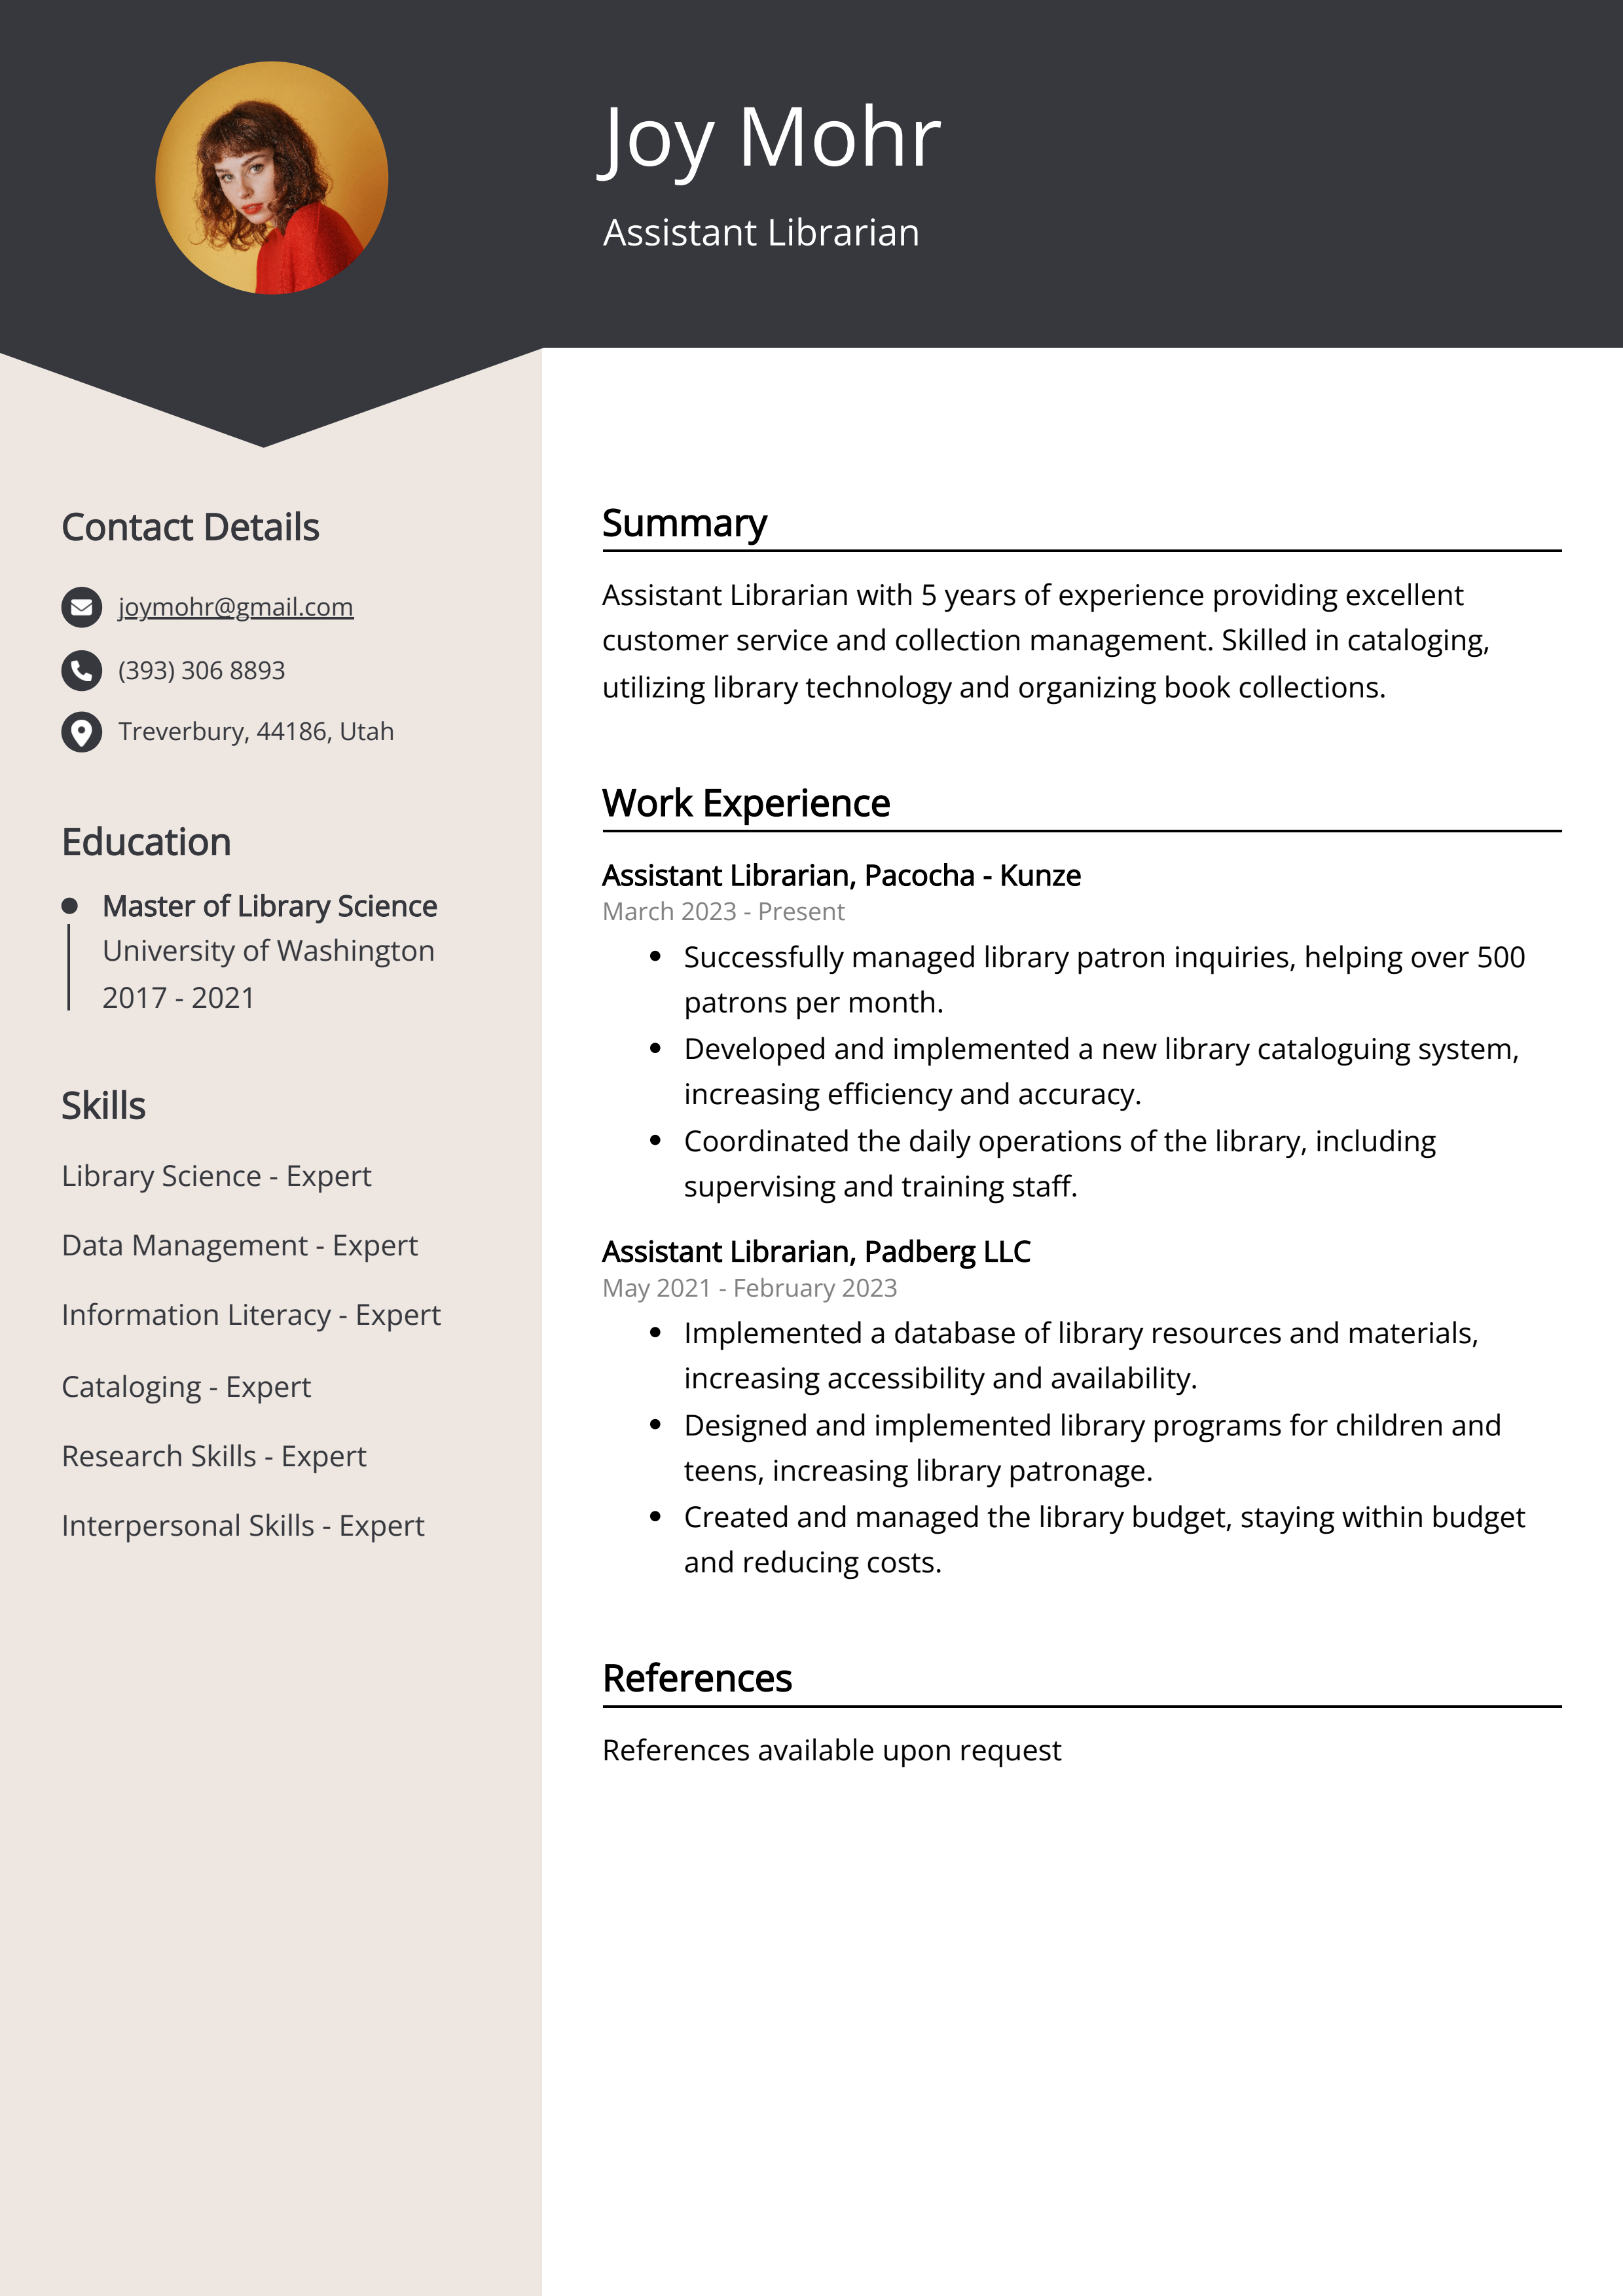 Assistant Librarian CV Example